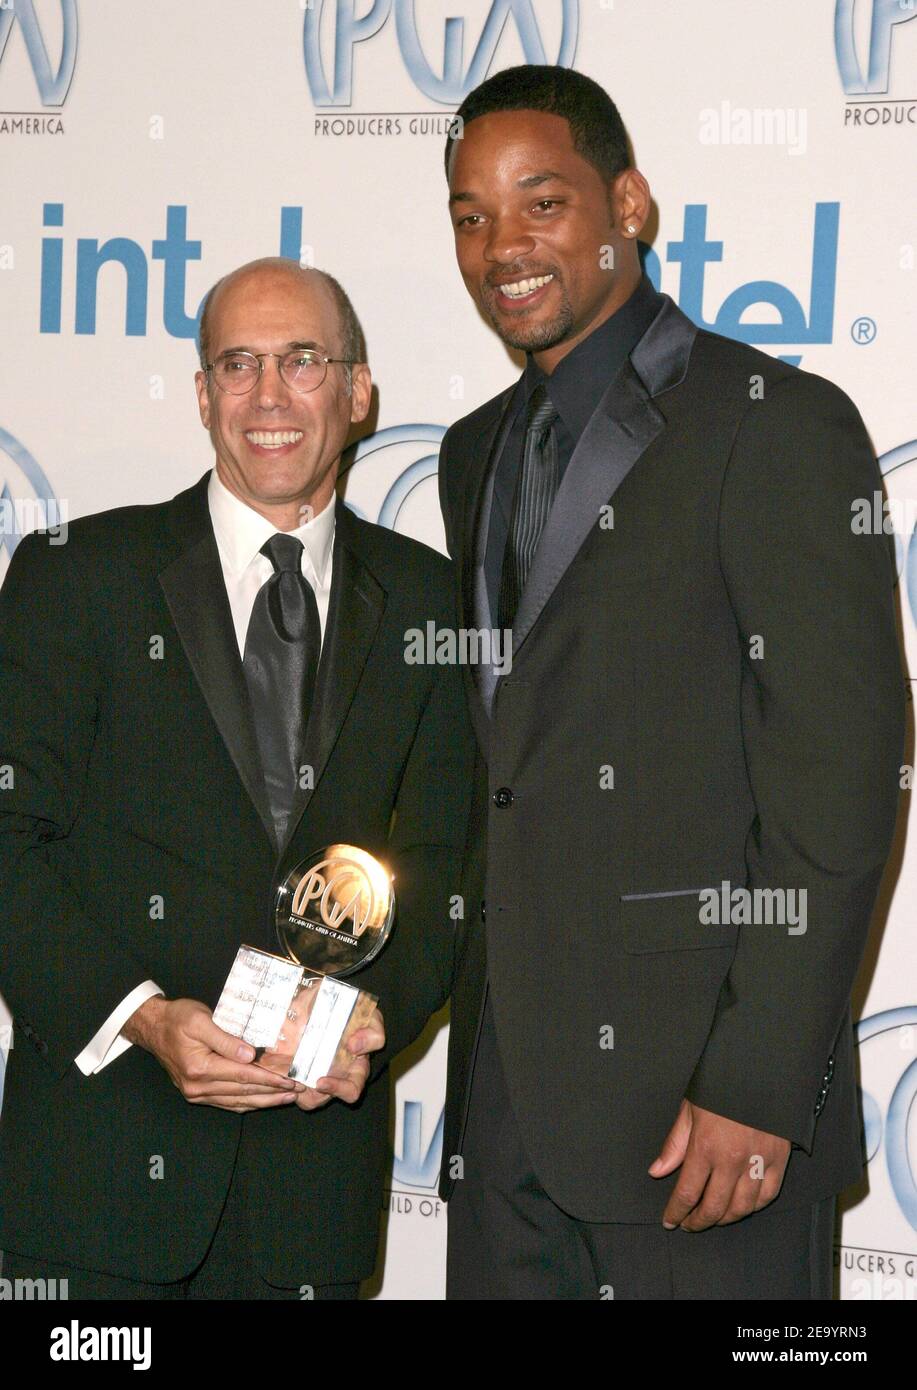 Will Smith and Milestone Award recipient Jeffrey Katzenberg attend the 16th Annual Producers Guild of America Awards held at the Culver Studios in Culver City, CA on January 22, 2005. Photo by Denise Fleming/ABACA. Stock Photo